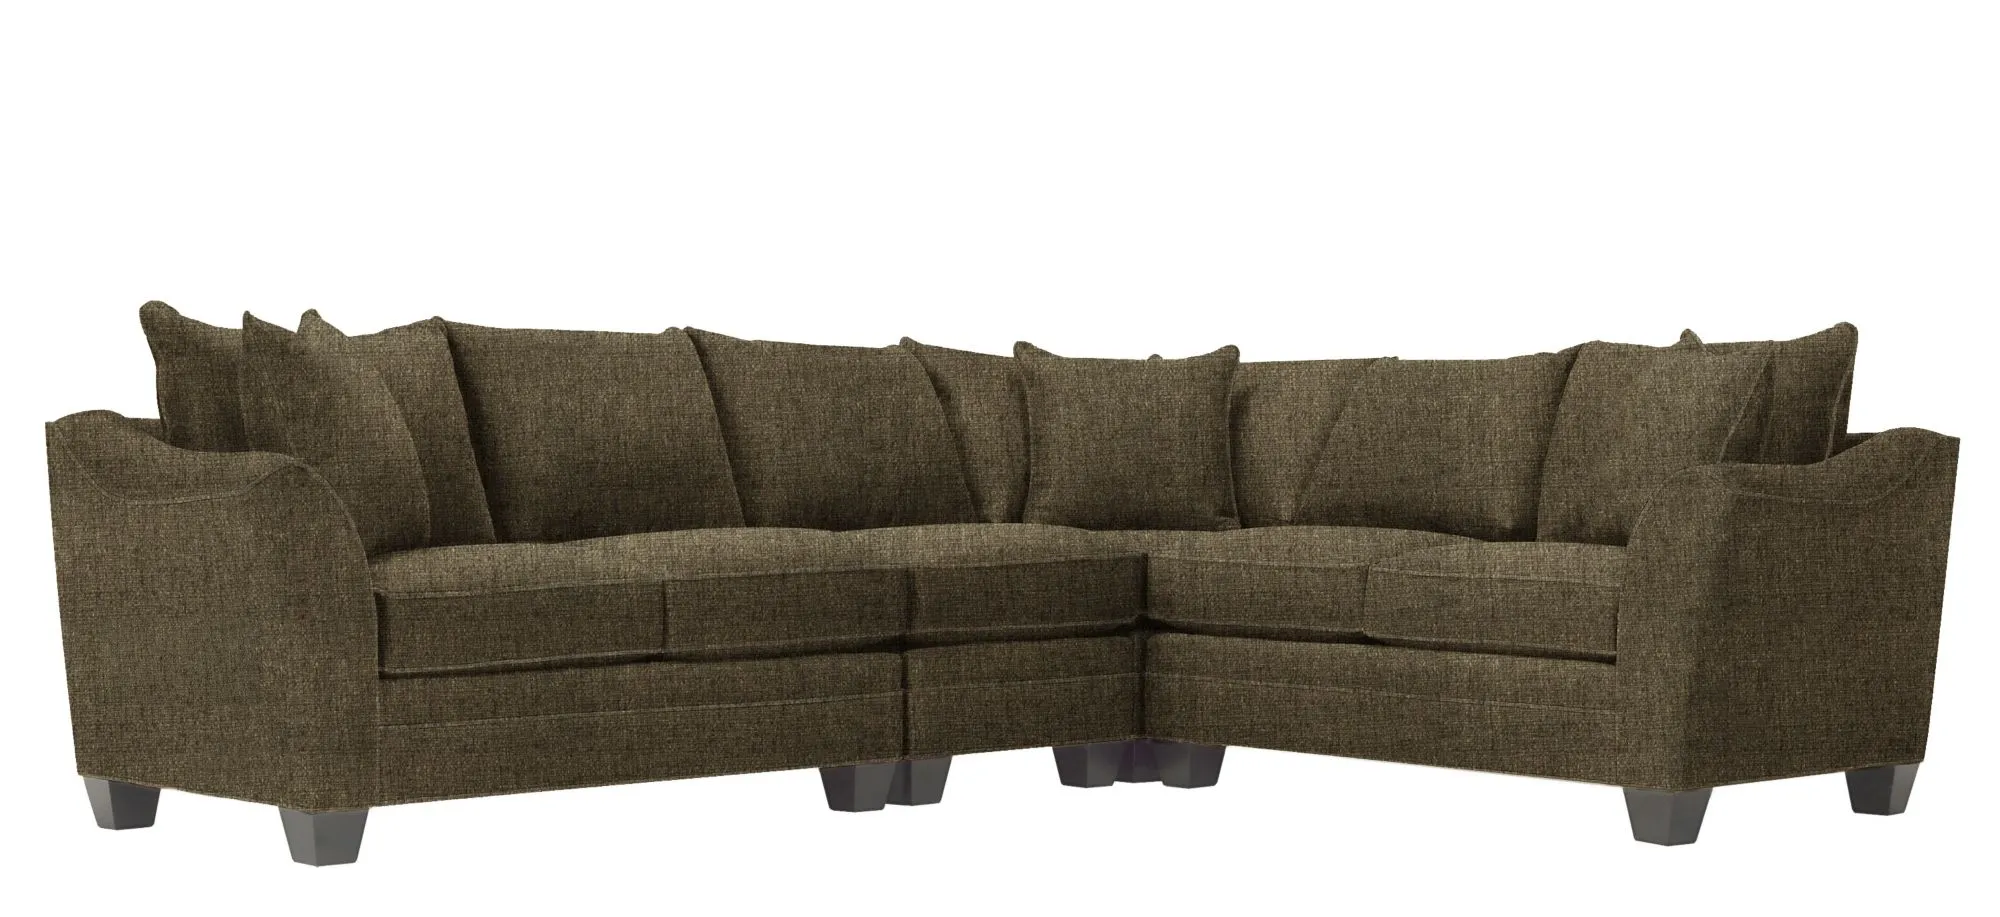 Foresthill 4-pc. Loveseat Sectional Sofa in Sugar Shack Cafe by H.M. Richards